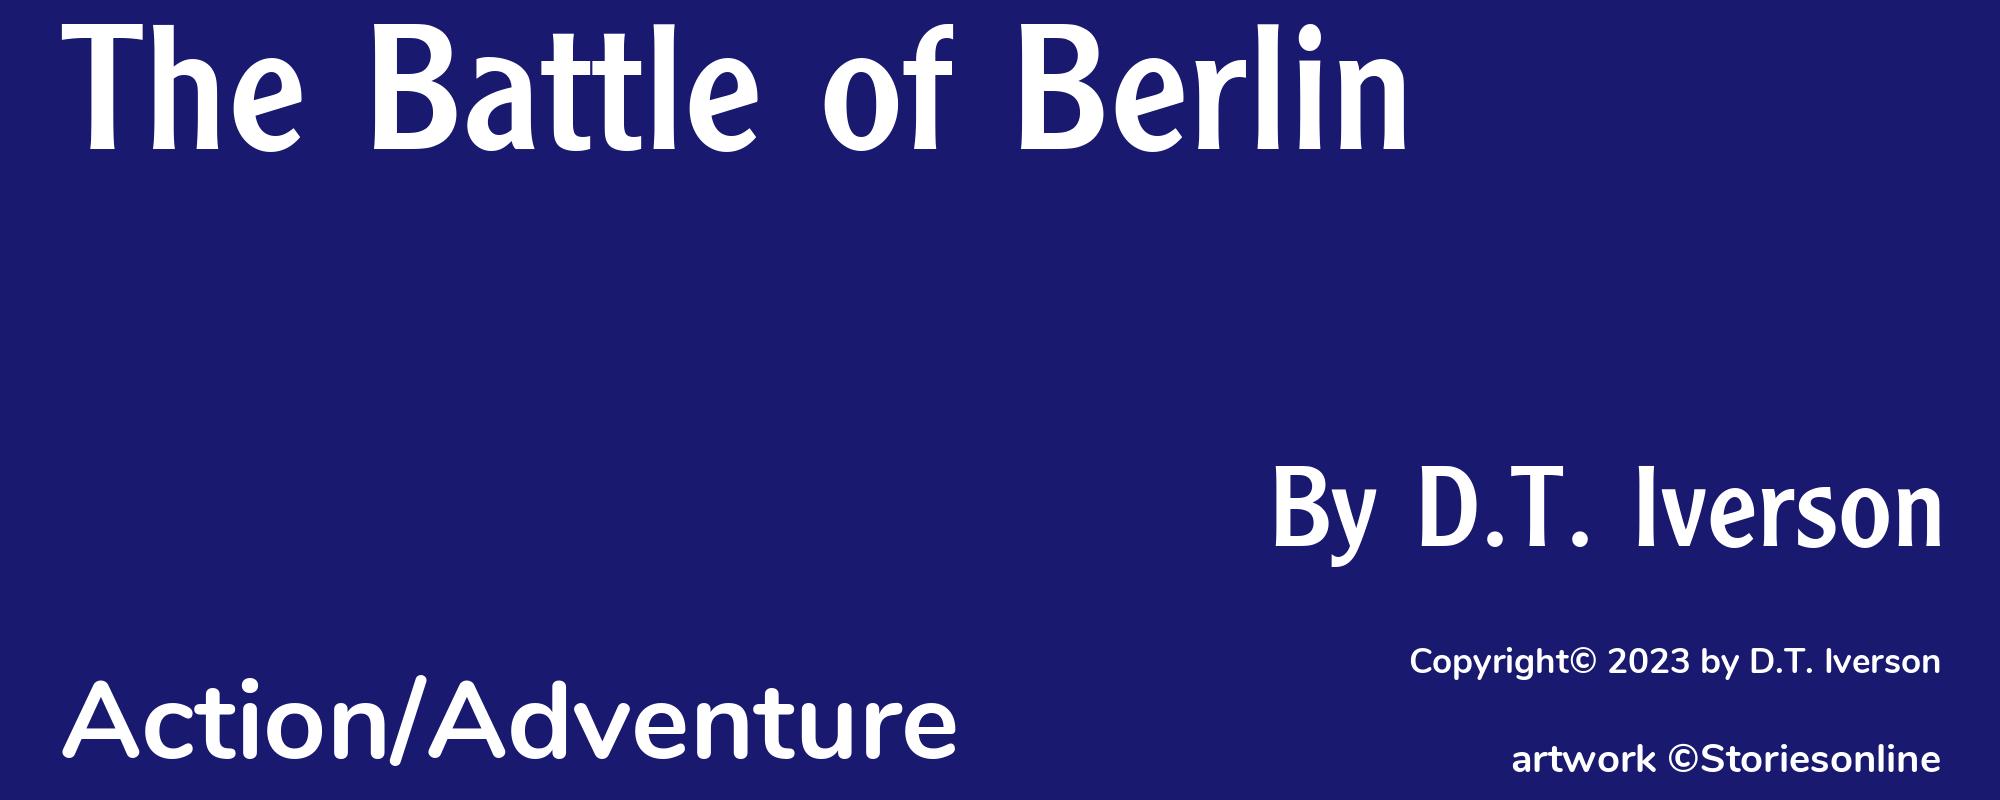 The Battle of Berlin - Cover